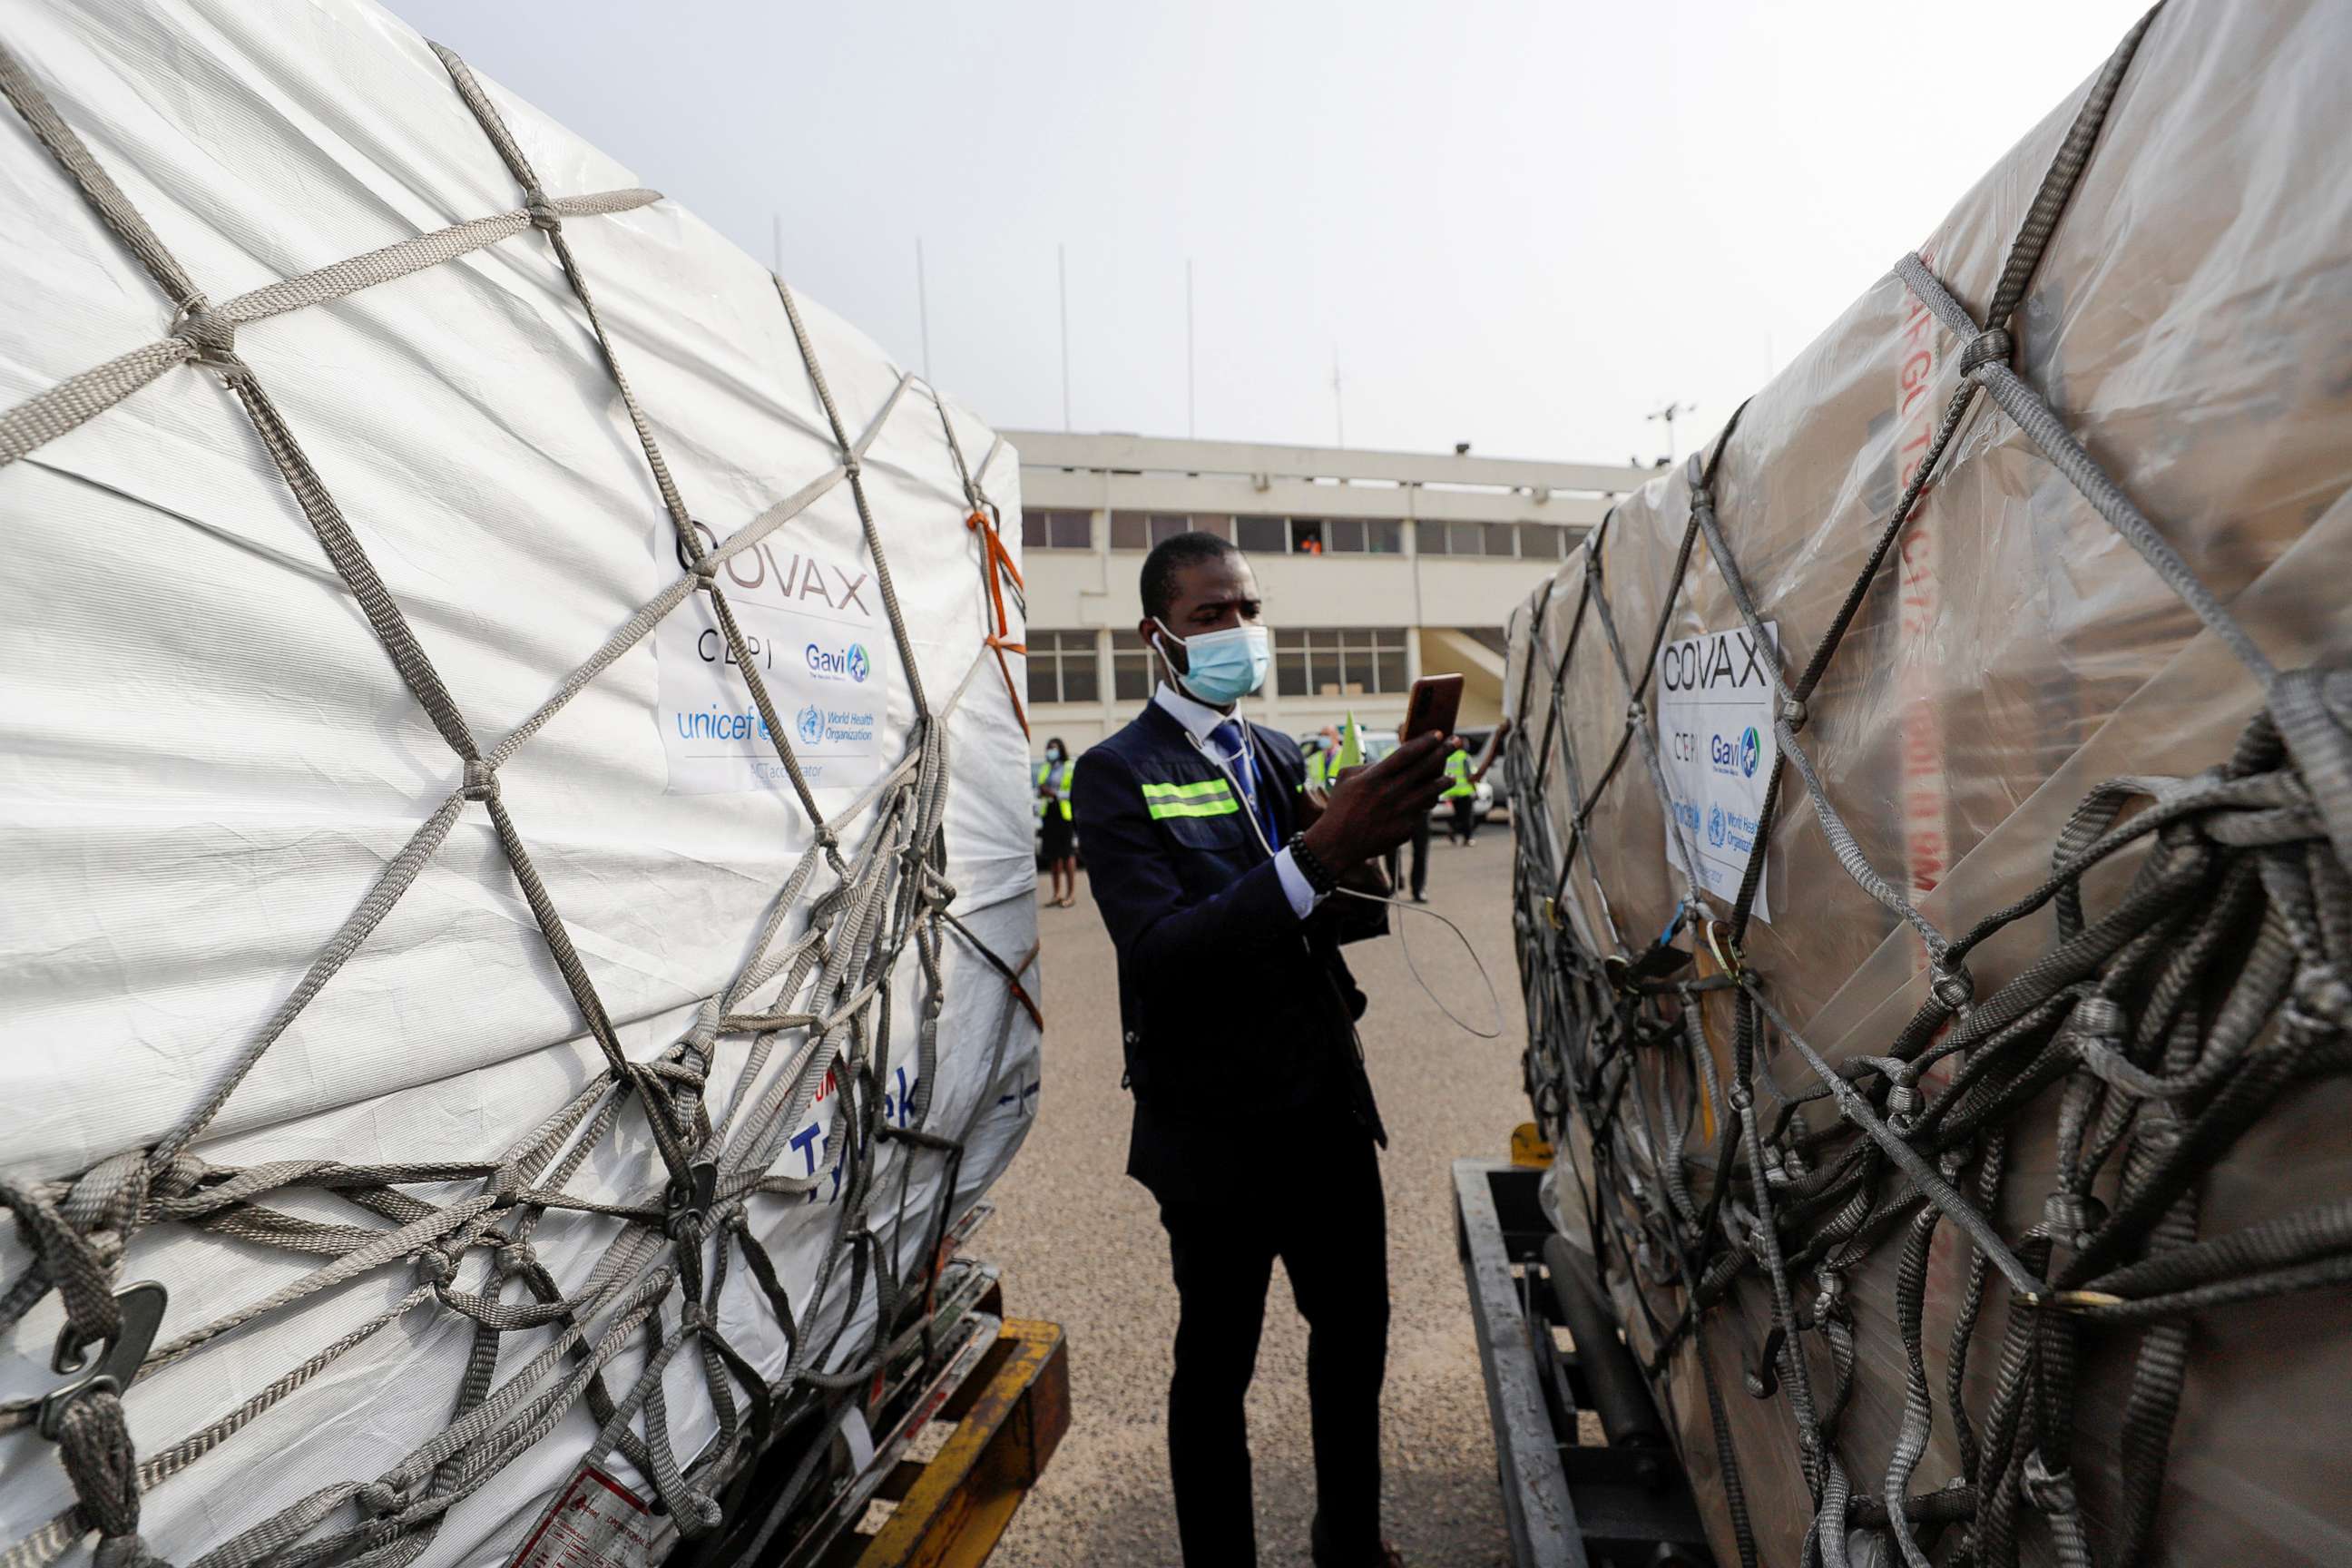 PHOTO: A worker checks boxes of AstraZeneca/Oxford vaccines as the country receives its first batch of COVID-19 vaccines under COVAX, at the international airport of Accra, Ghana Feb.24, 2021.